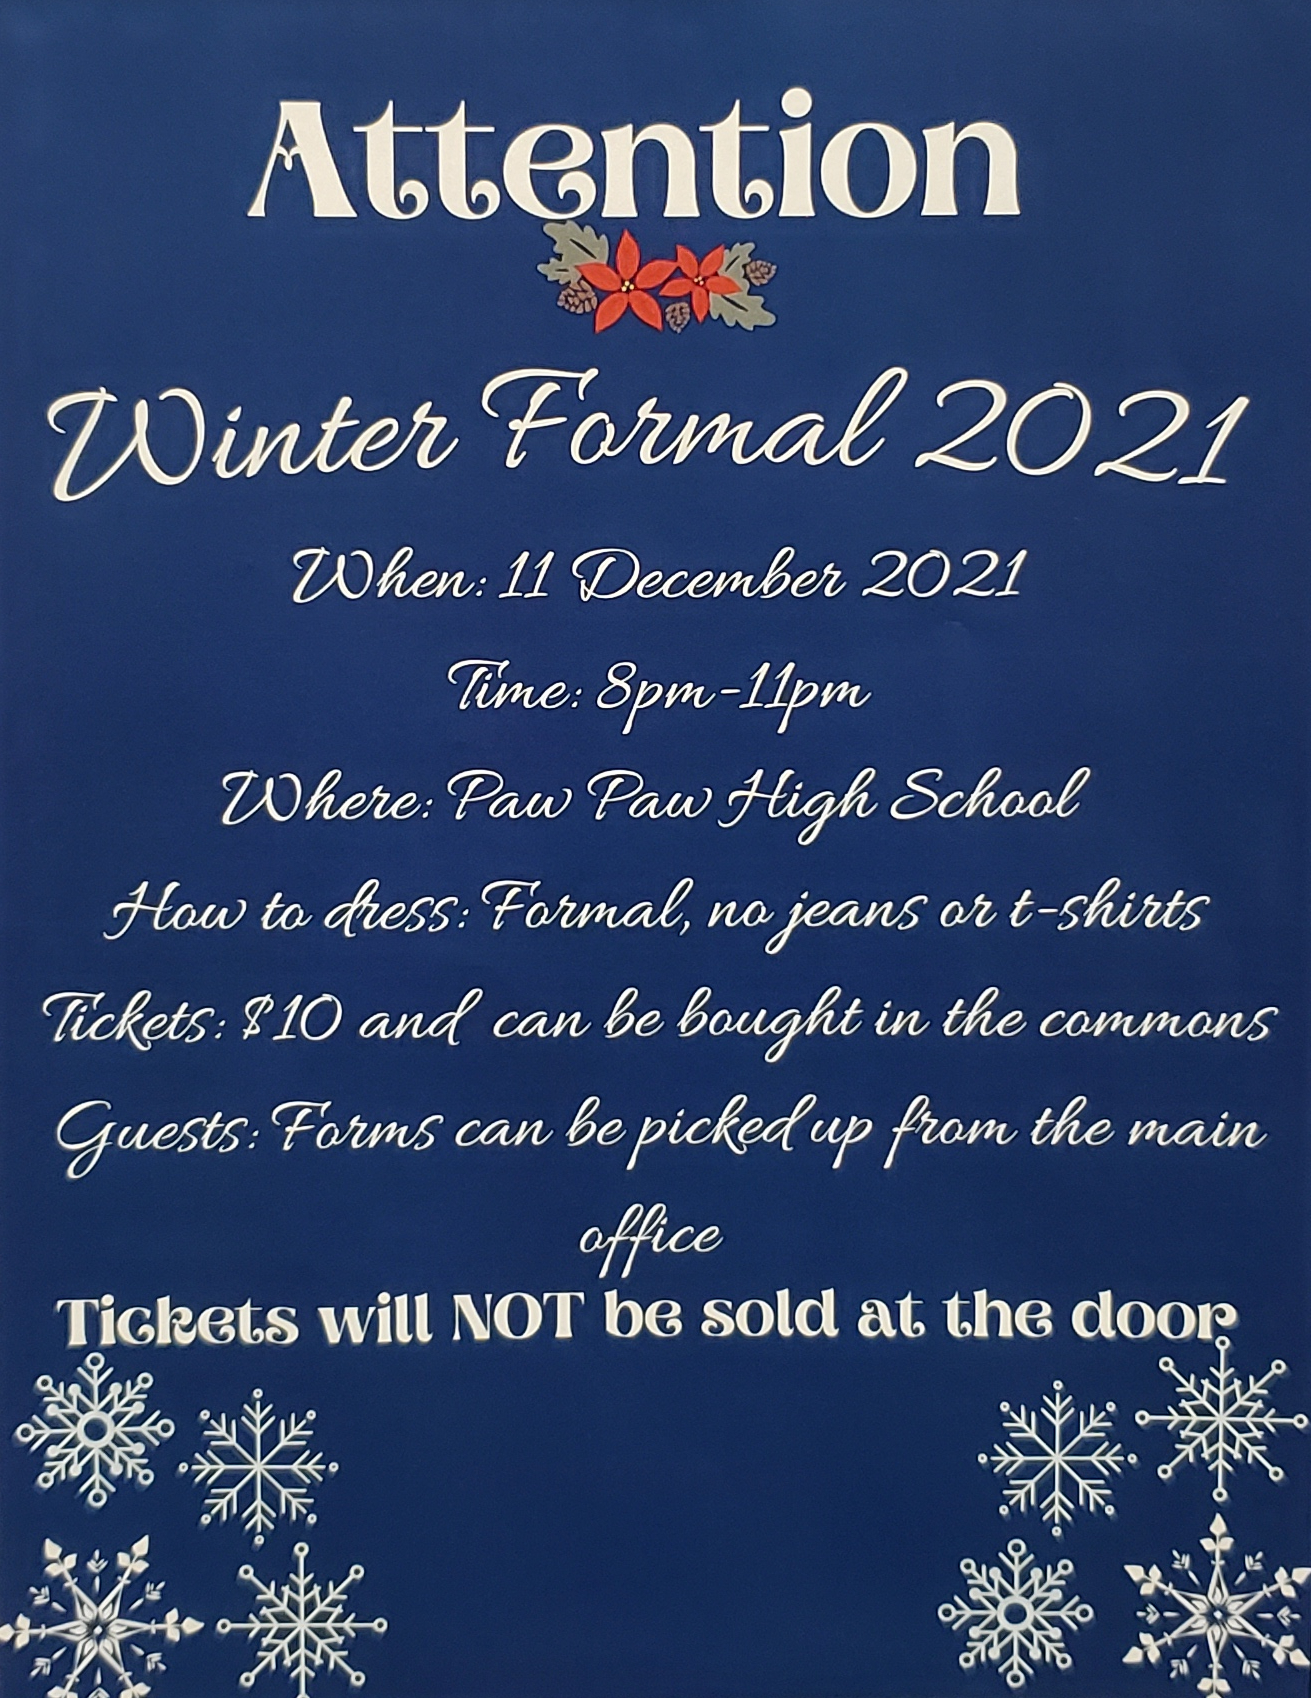 Poster for the Winter Formal Dance 2021